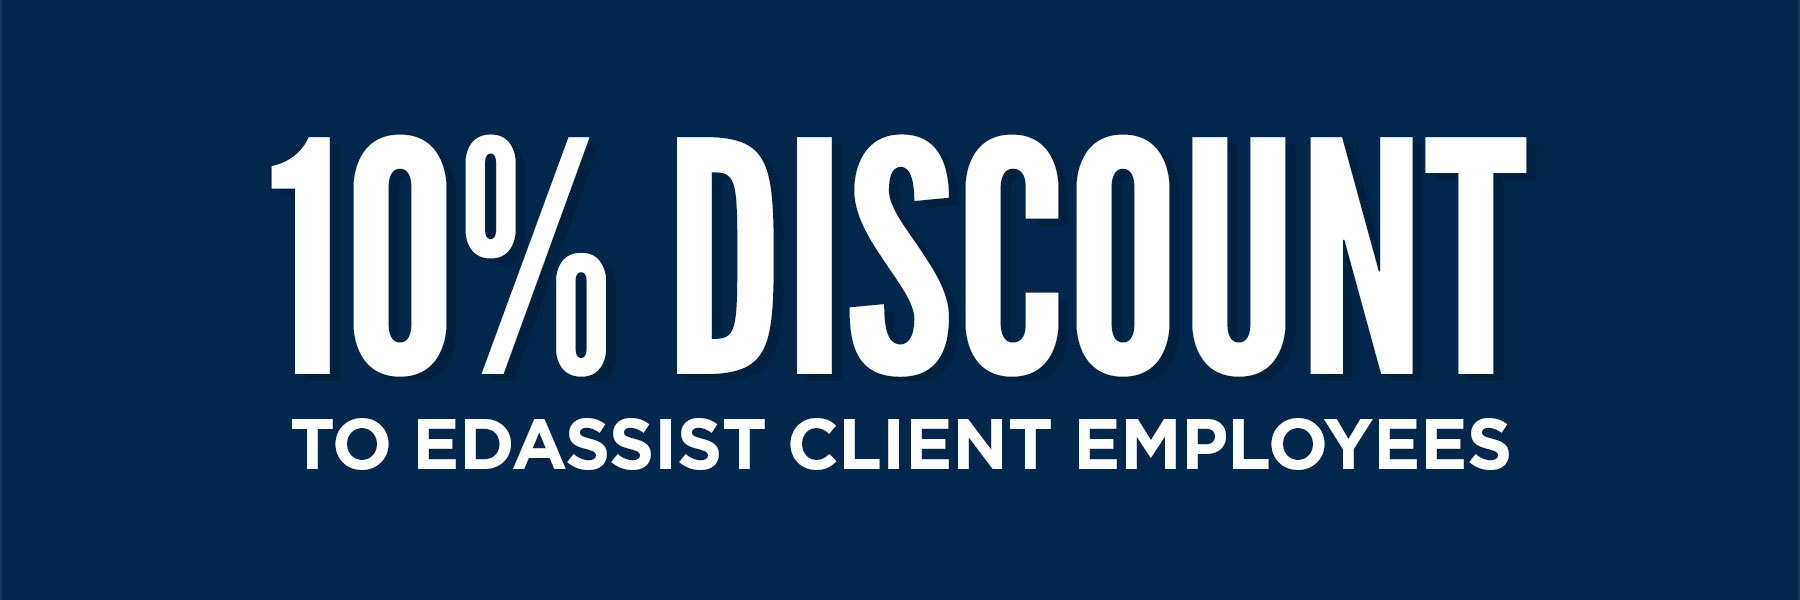 10% discount to edassist client employees